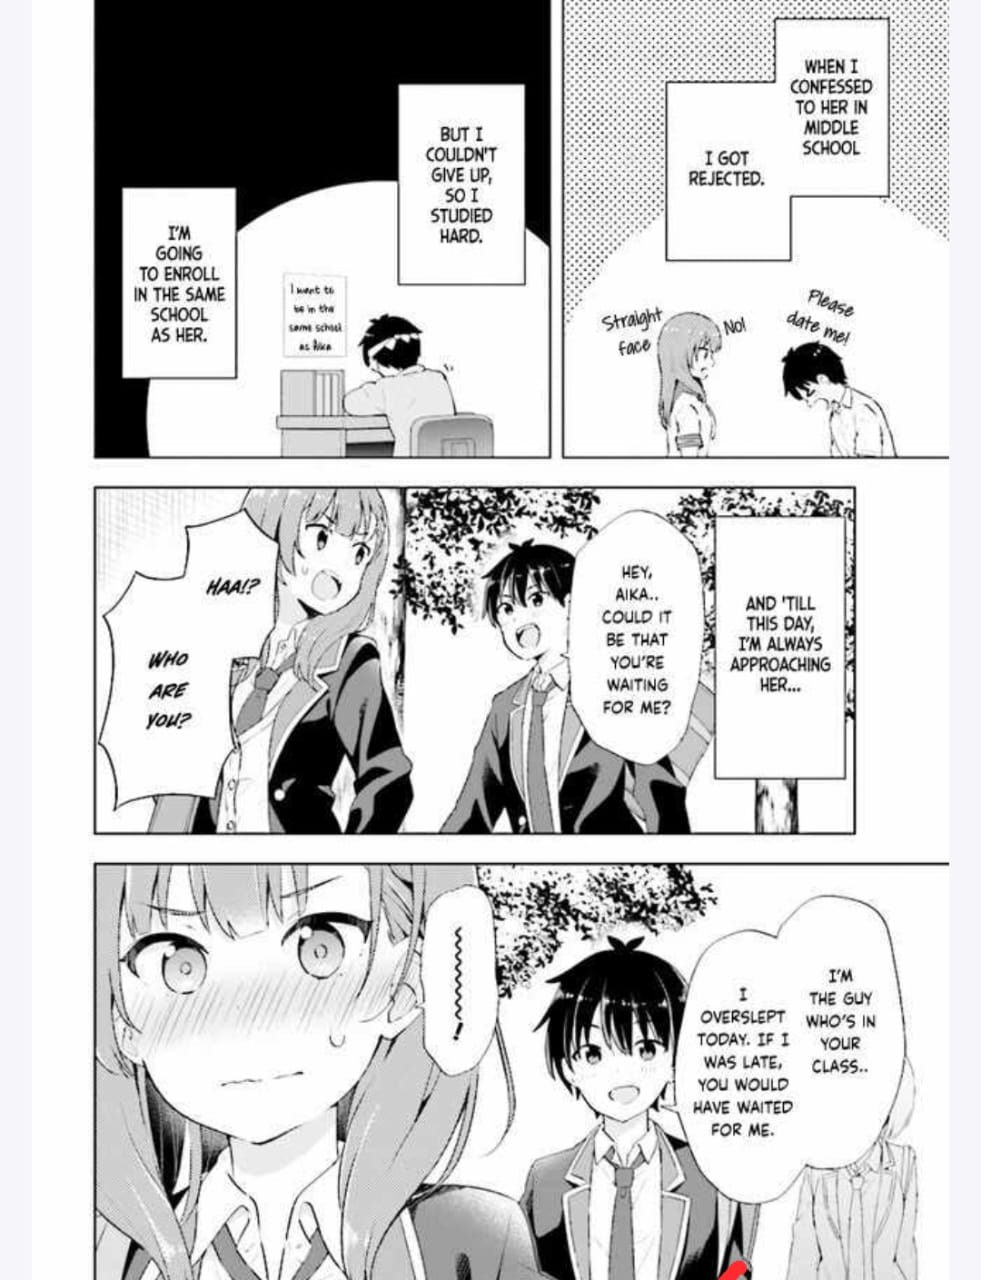  The Dreaming Boy Is A Realist Manga characters